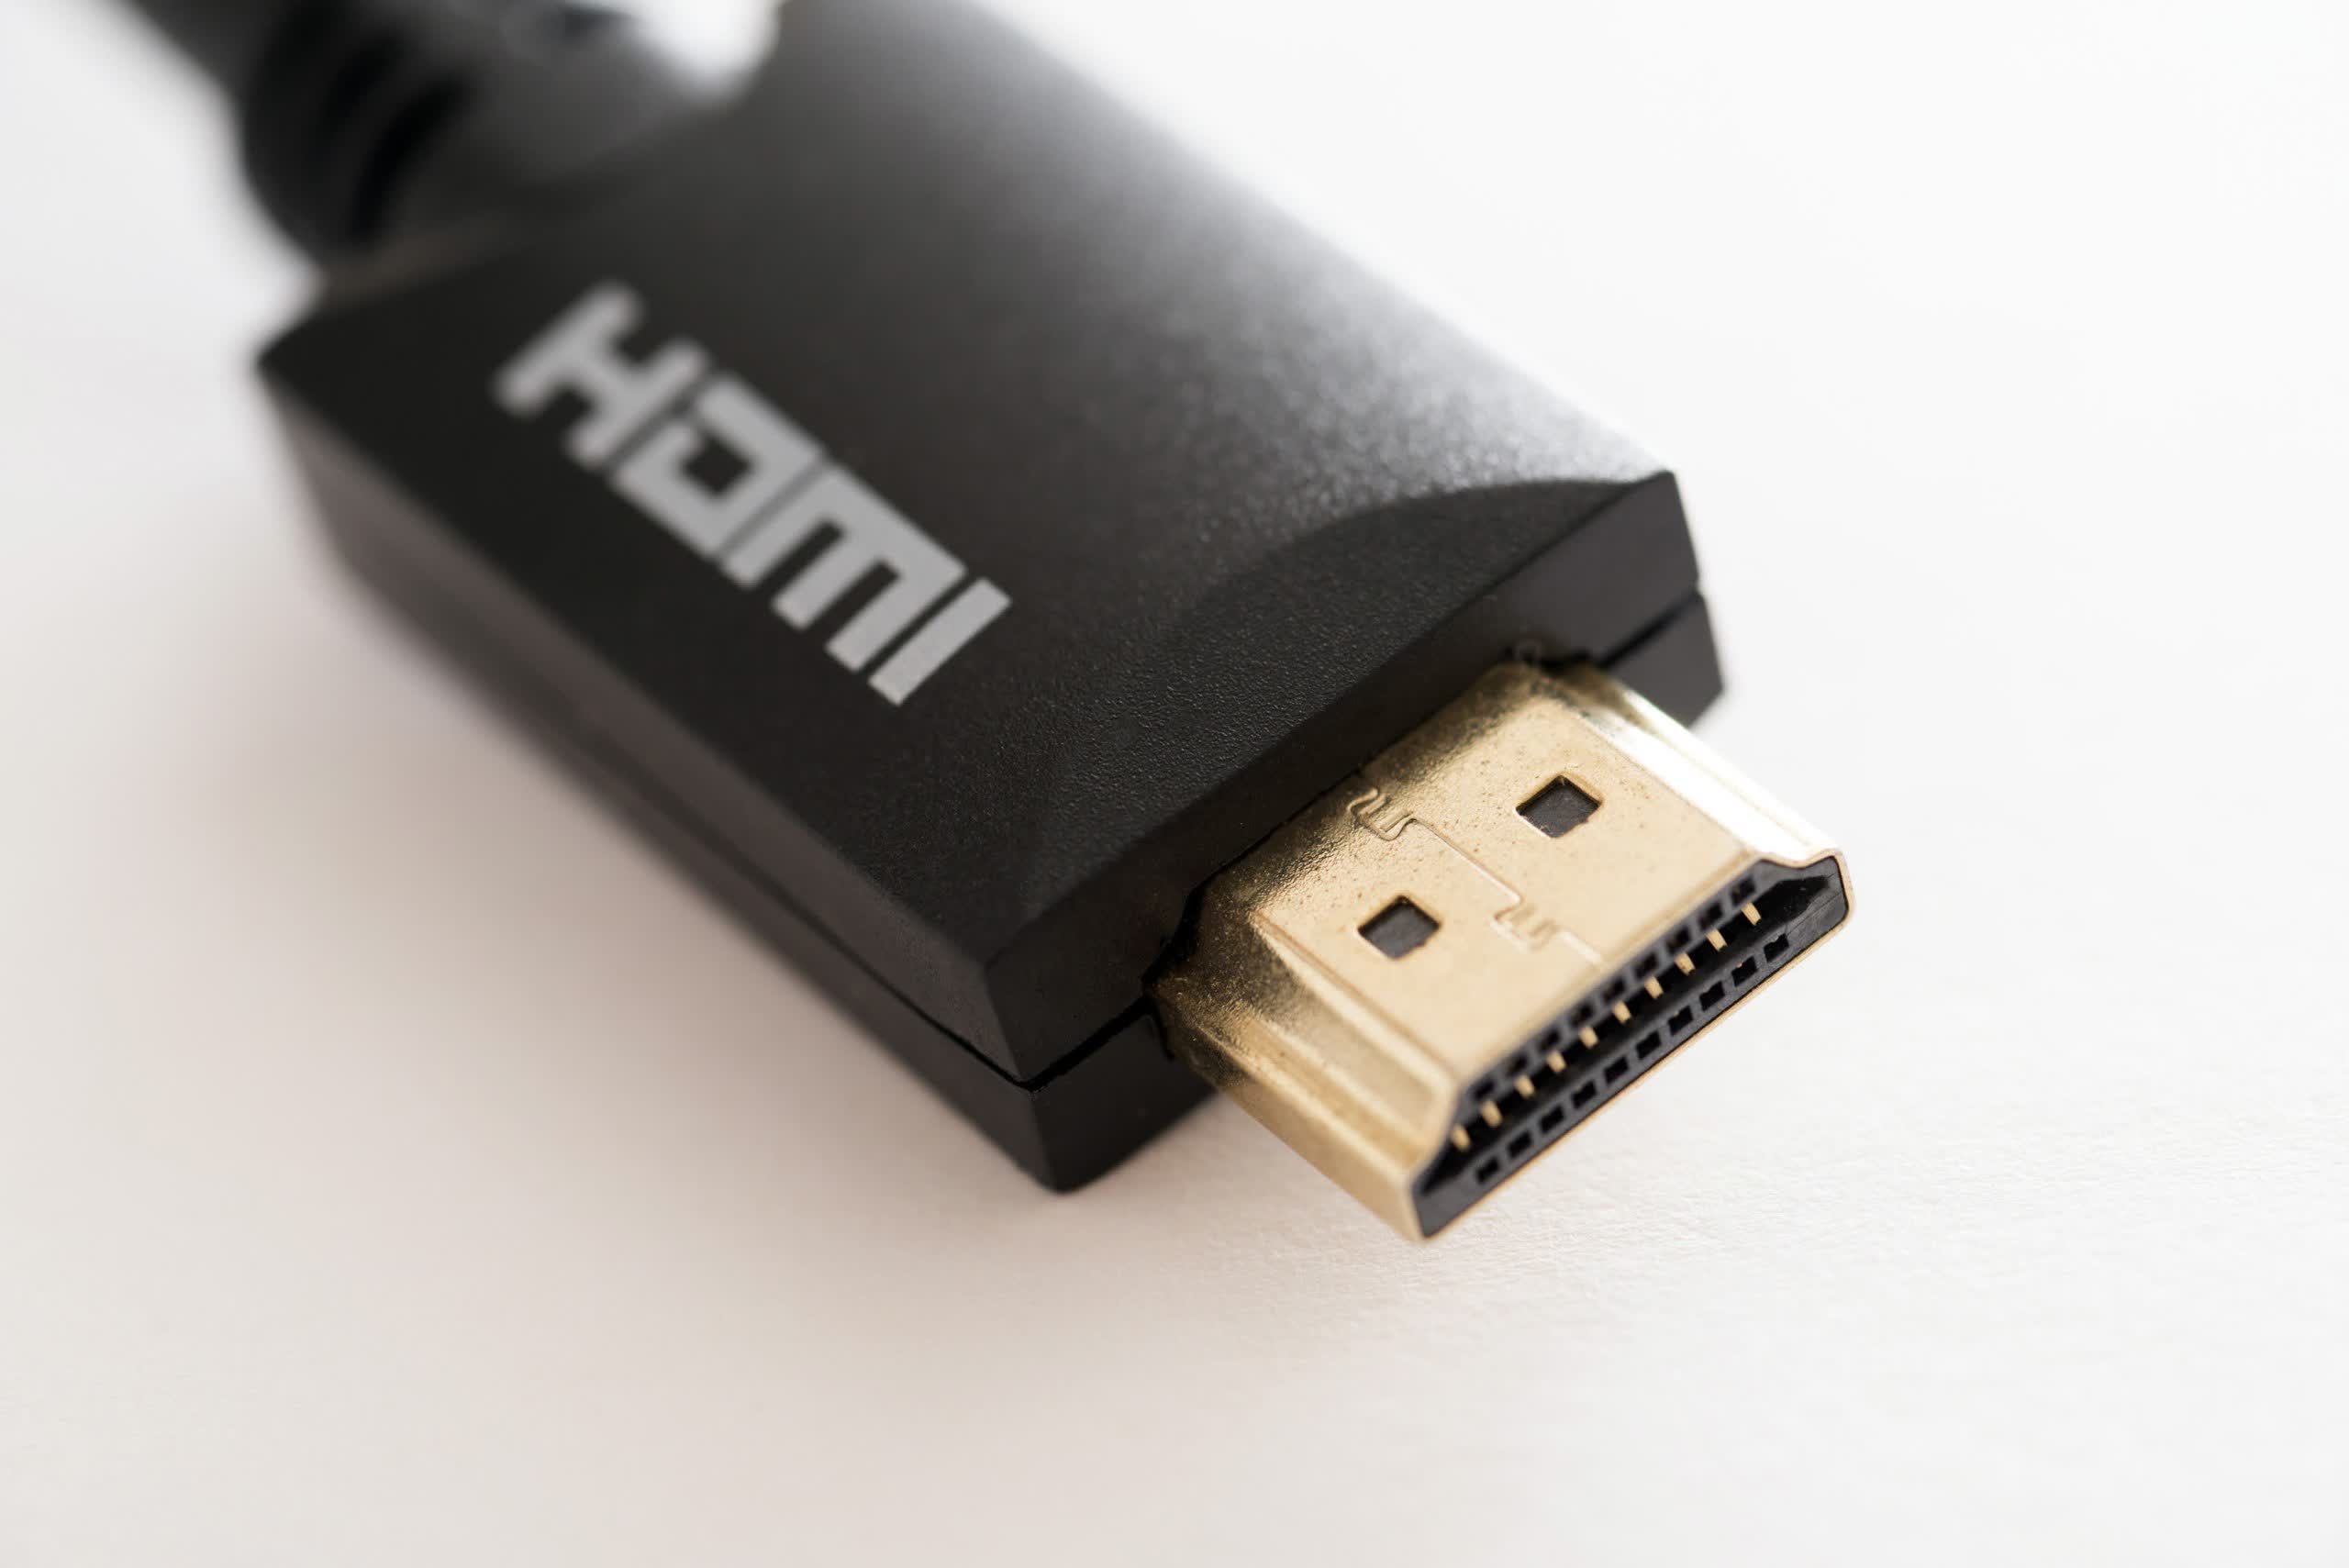 HDMI 2.1a is coming to CES 2022